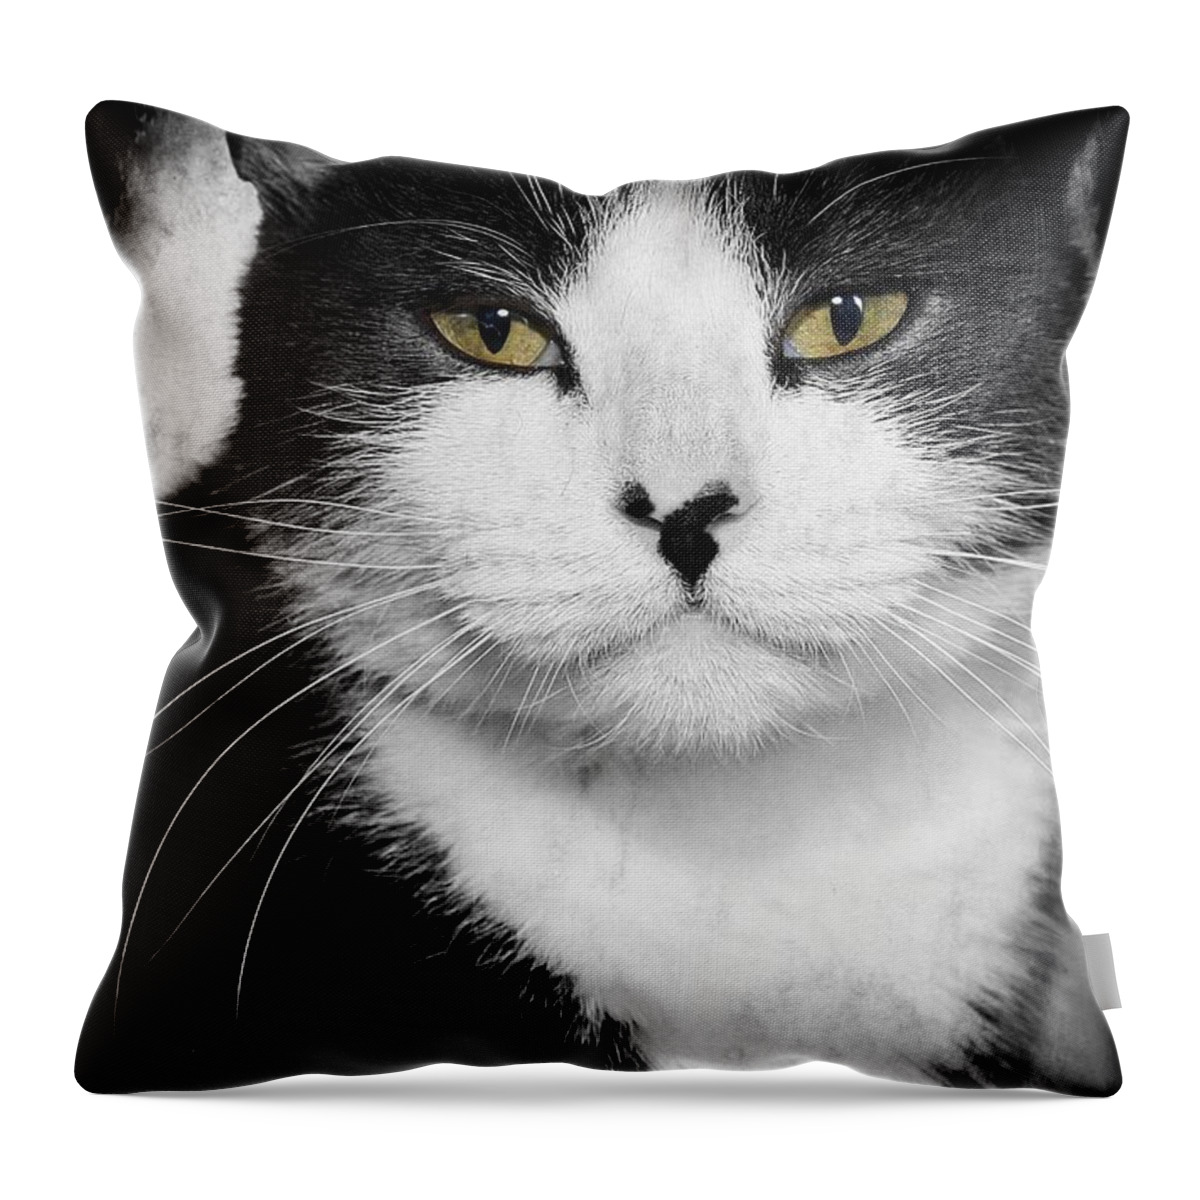 Cat Throw Pillow featuring the photograph Kitty #3 by Joyce Baldassarre